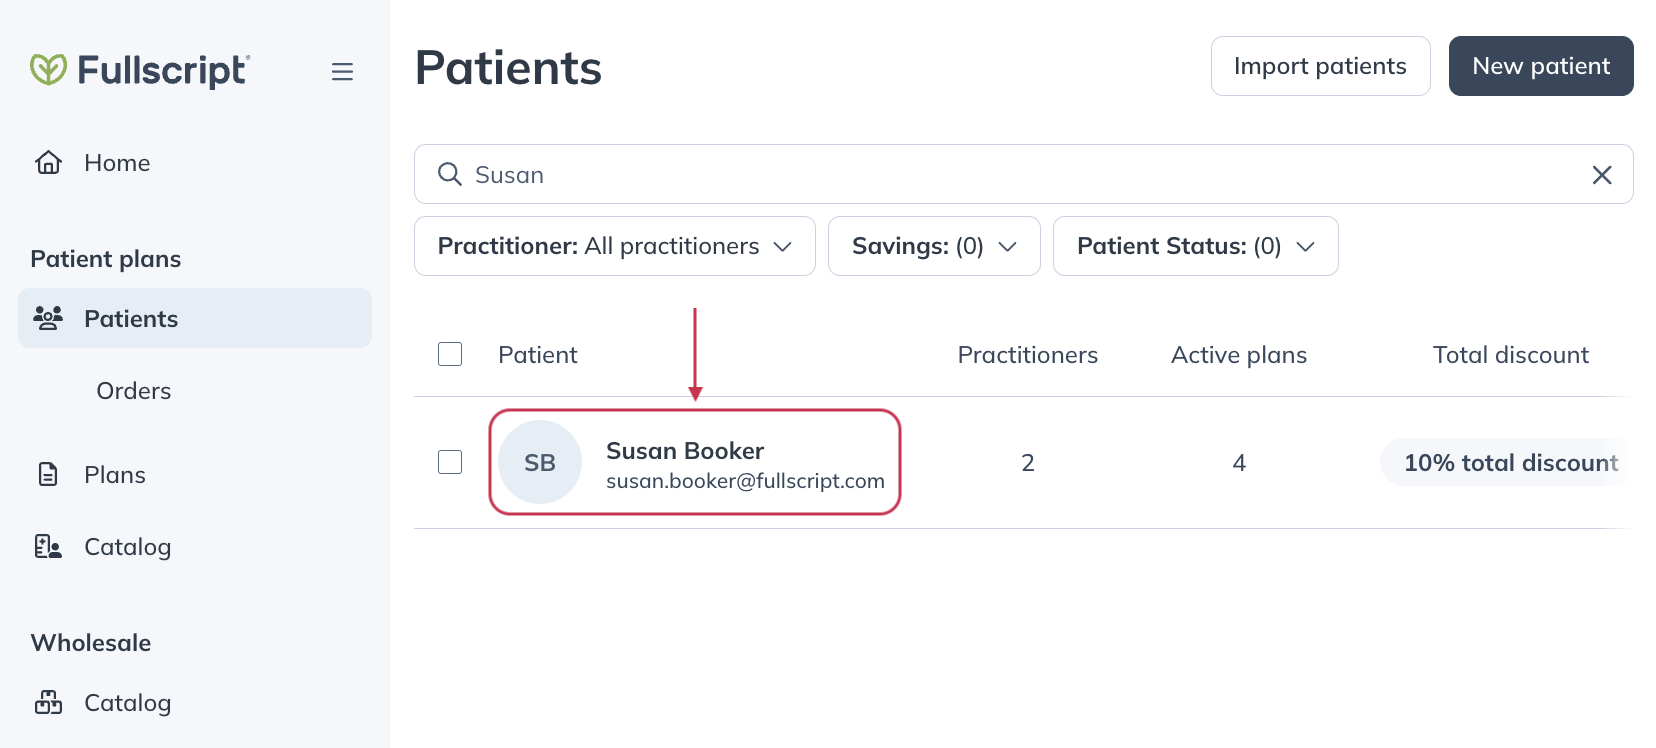 Selecting a patient from the patient list